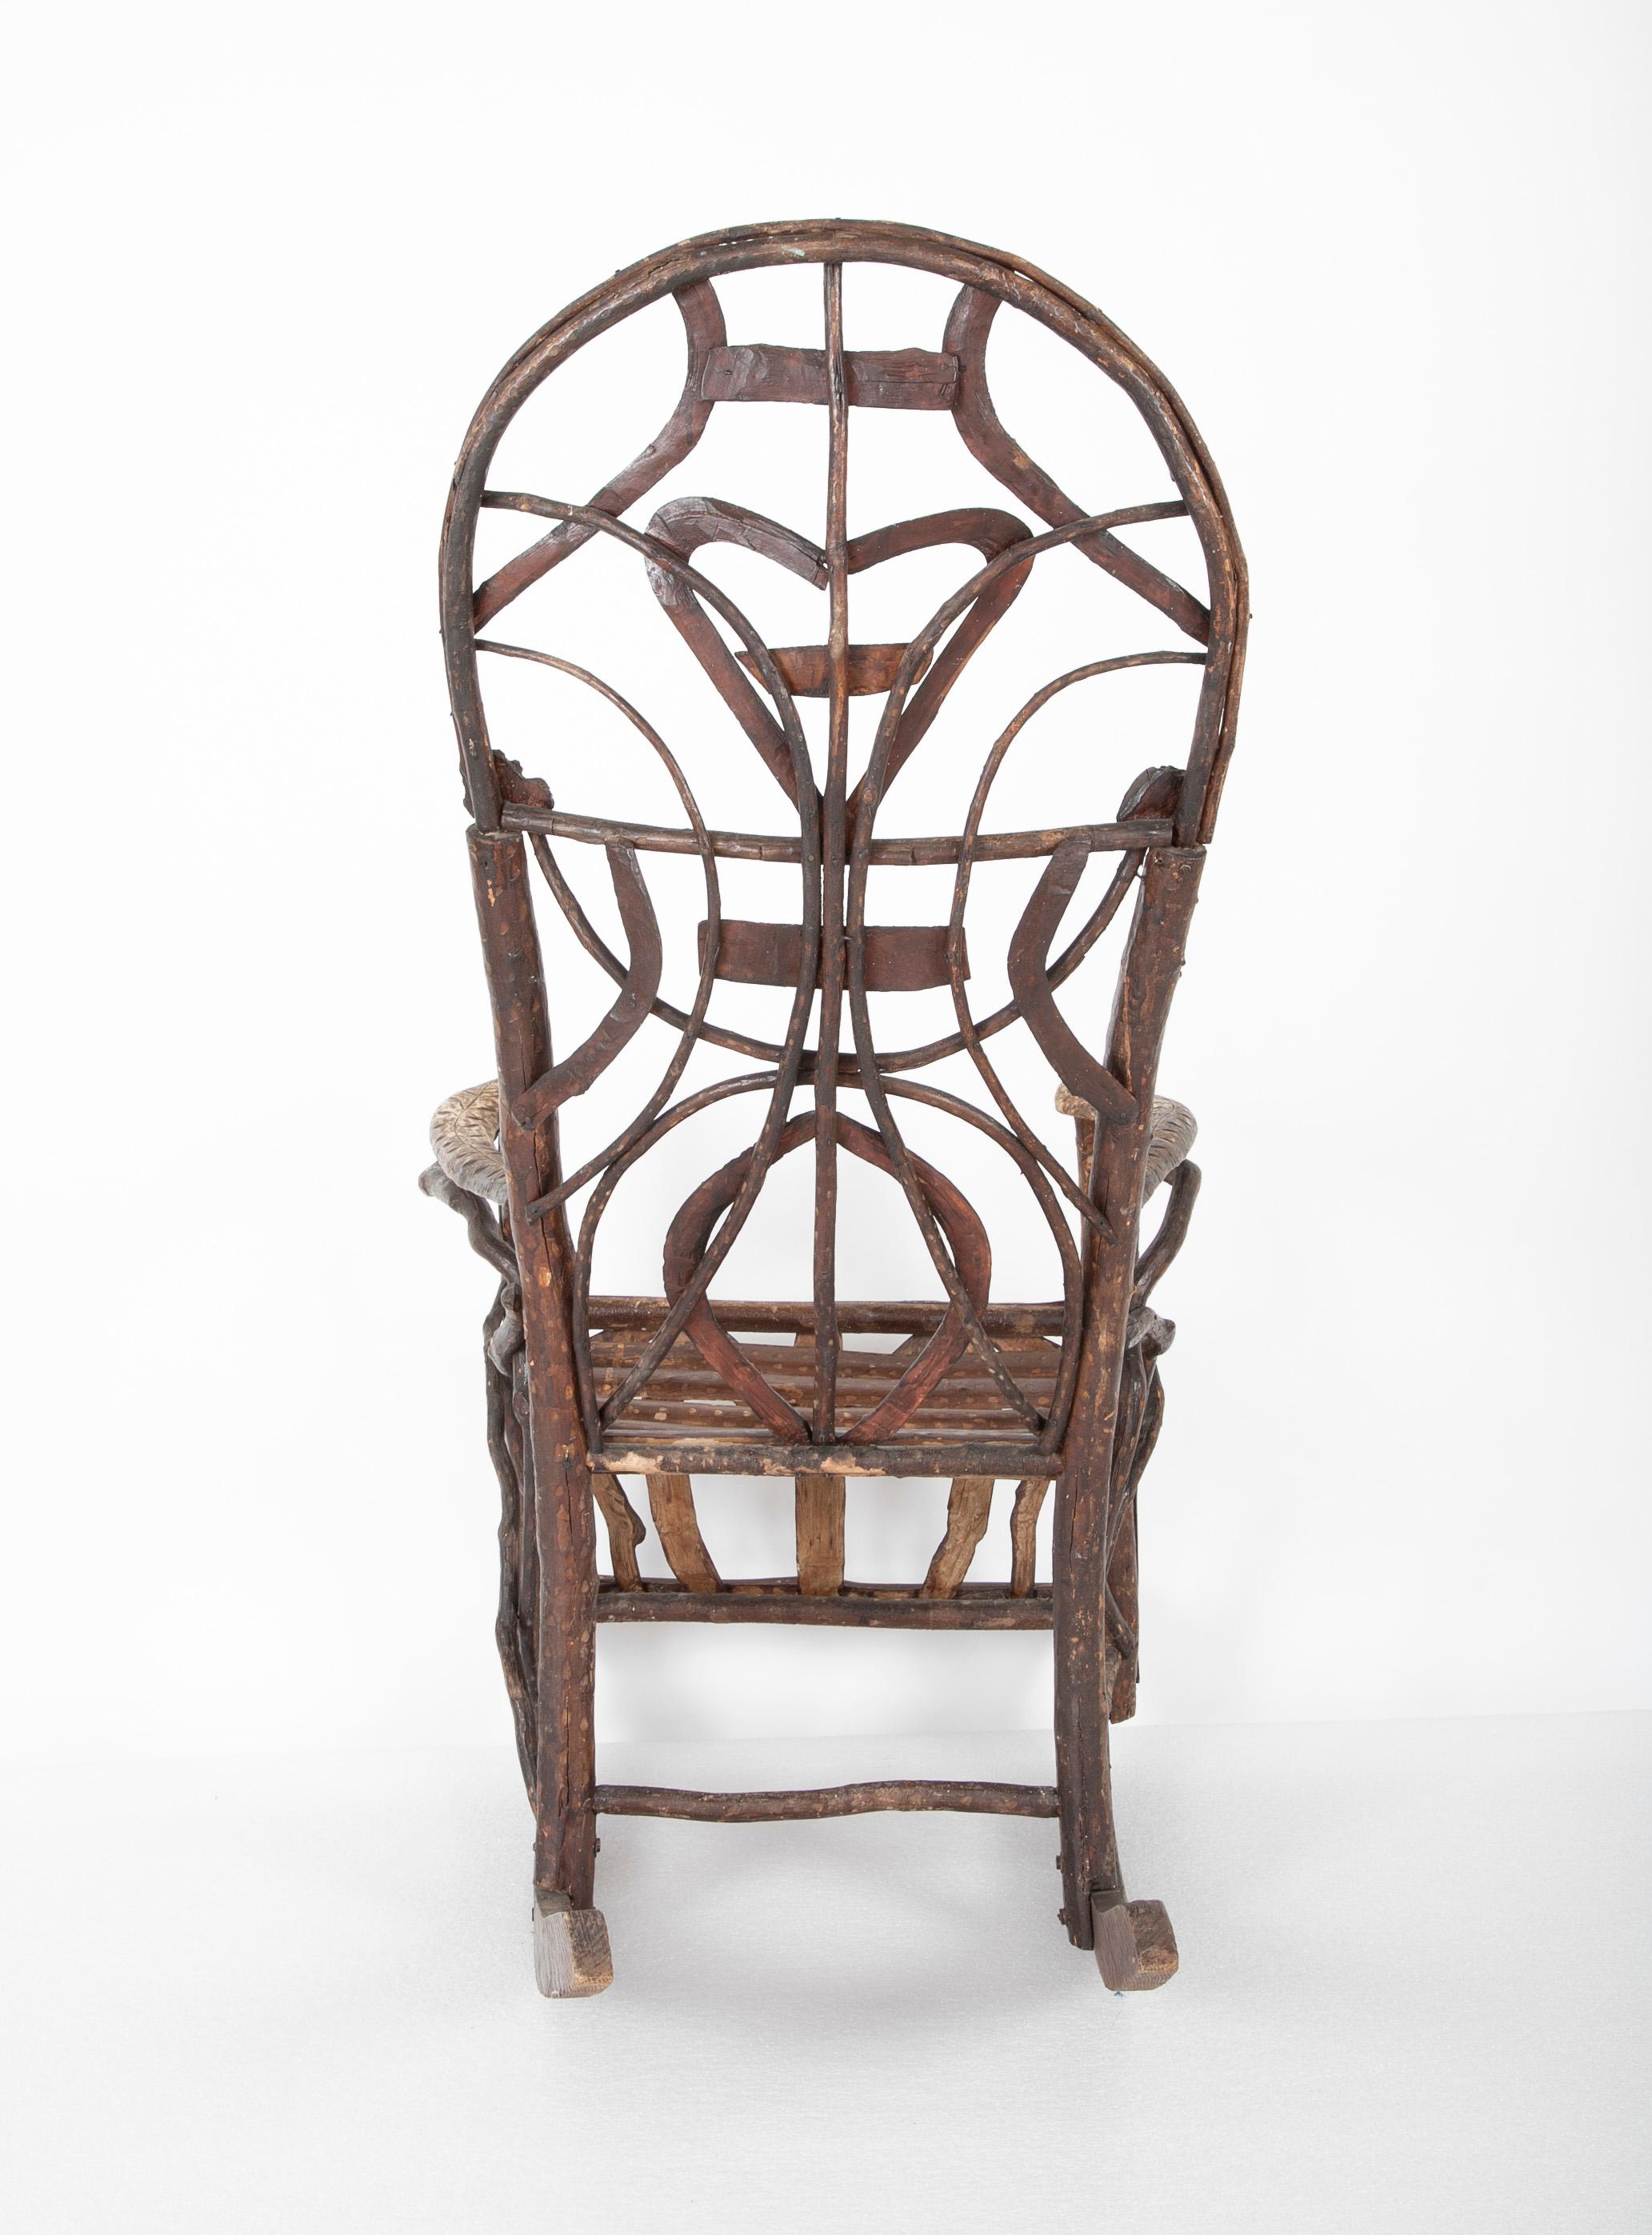 Rustic Rocking Chair Attributed to Rev. Ben Davis of Blowing Rock, NC 2